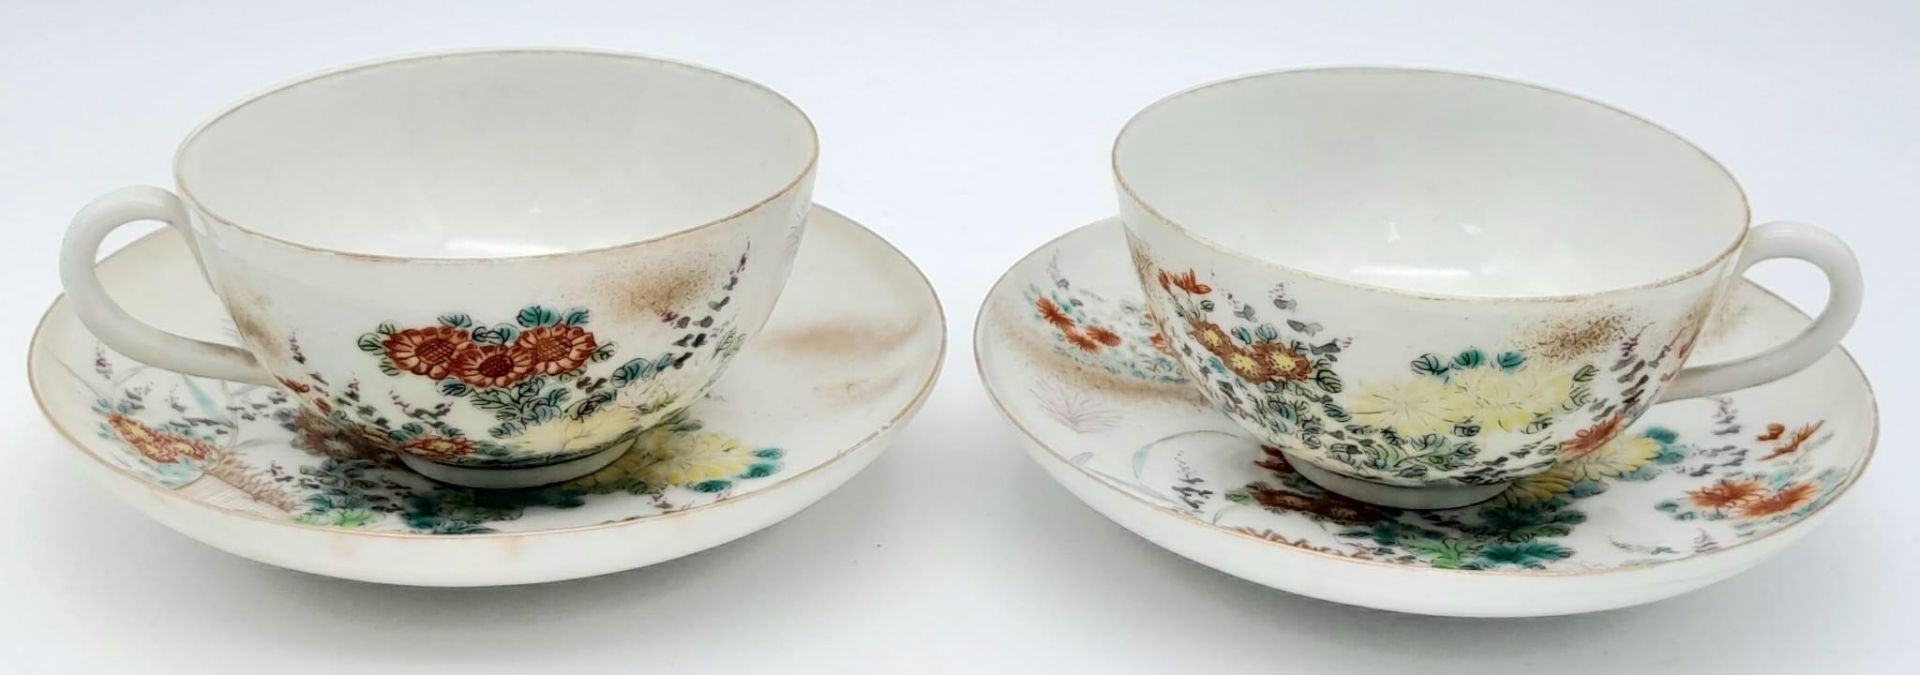 A pair of antique Japanese, hand-painted cup and saucer. Fine bone china with a delightful floral